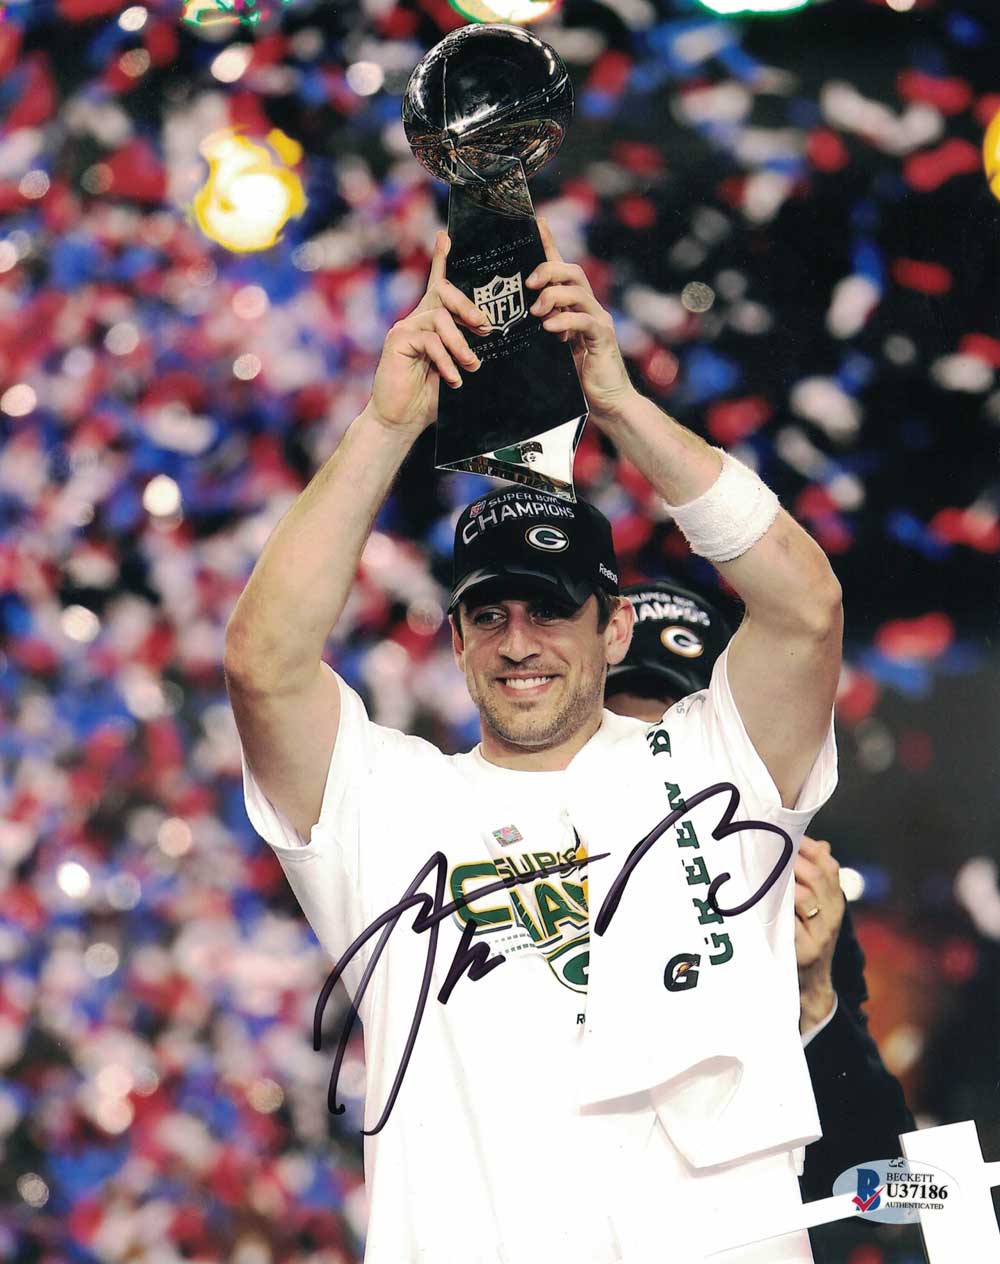 Aaron Rodgers Autographed/Signed Green Bay Packers 8x10 Photo BAS 29955